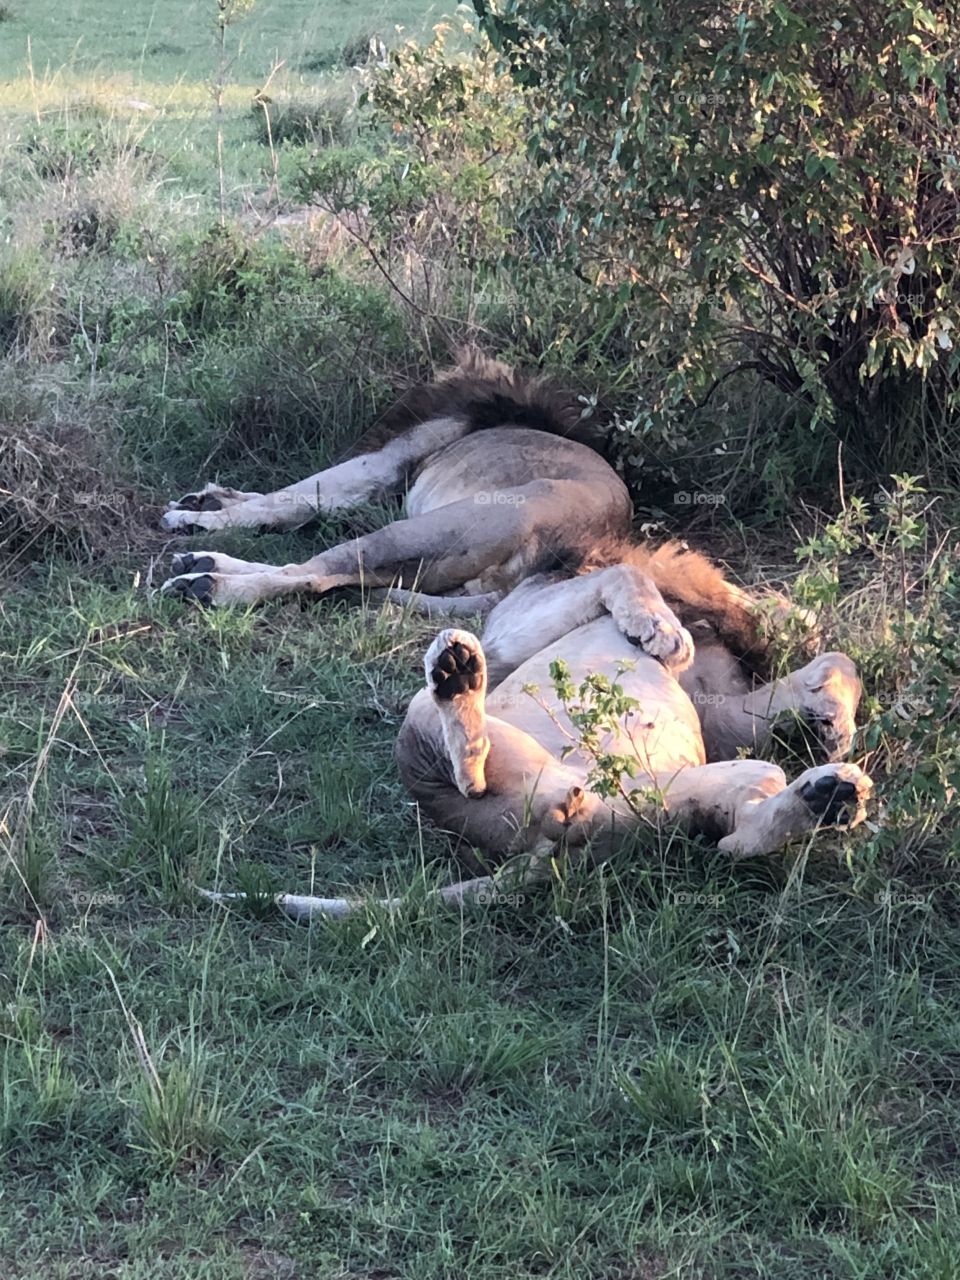 During the day these big cats need a nap. Kings of the wild take it easy too